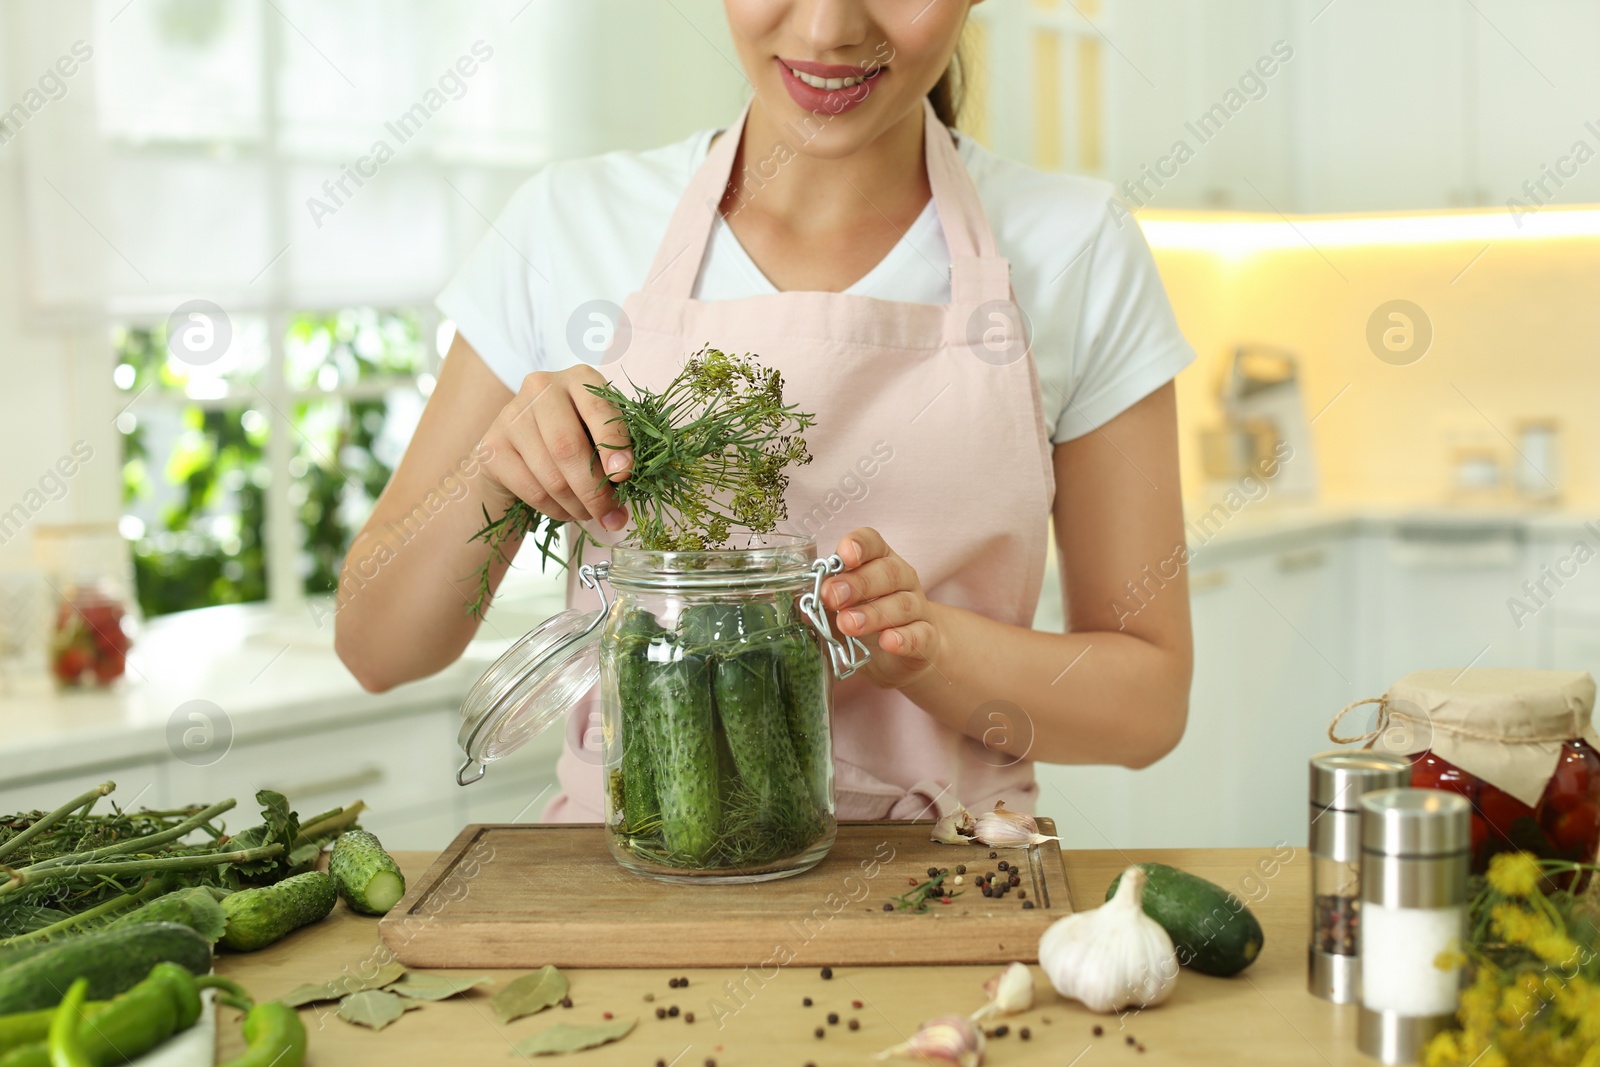 Photo of Woman putting dill into pickling jar at table in kitchen, closeup